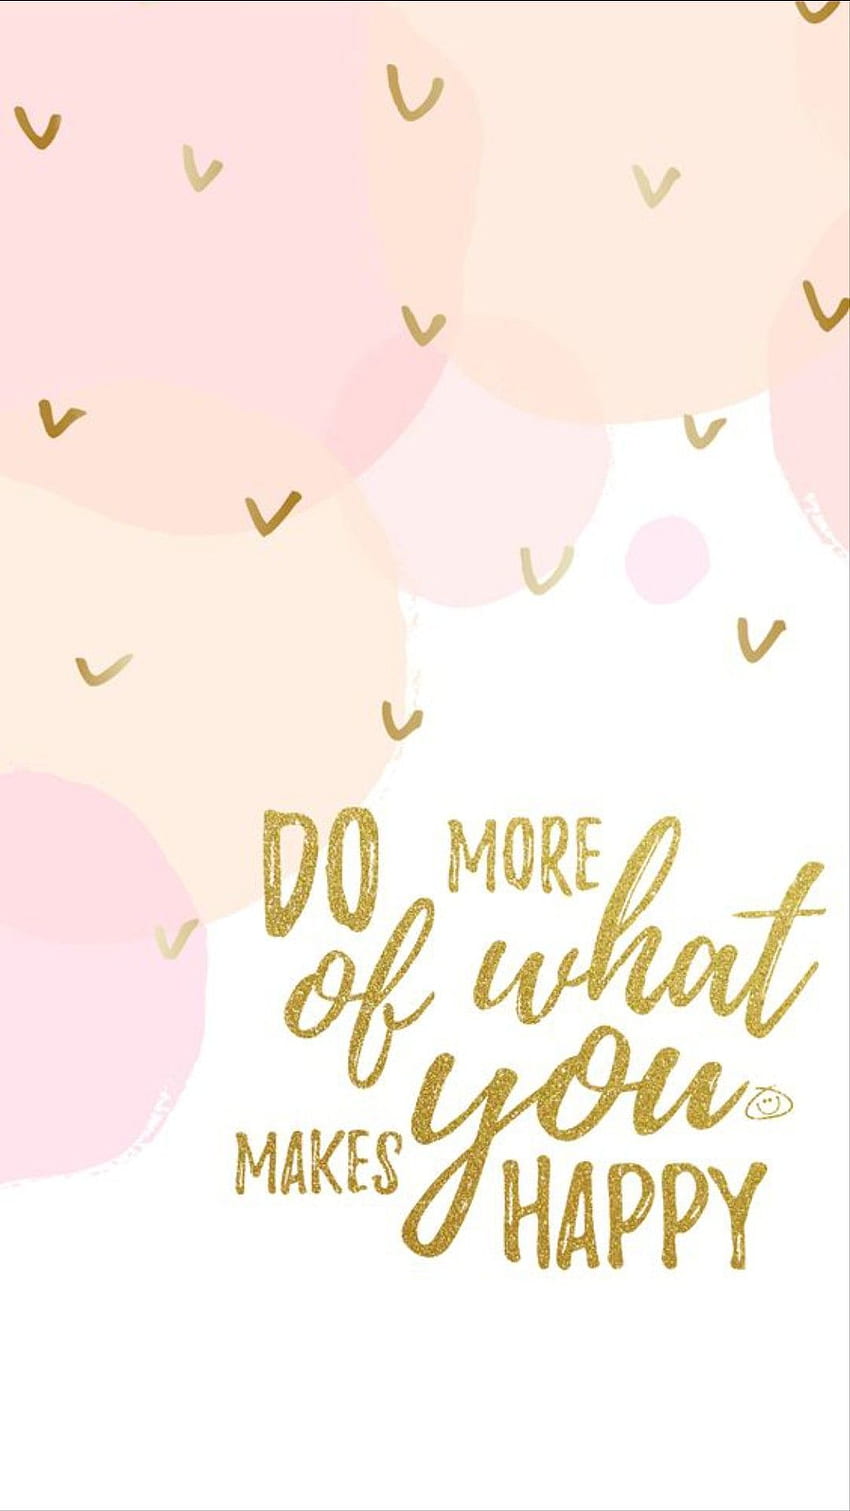 Quote Quotes Life quote do more of what makes you happy in 2020. Make you happy quotes, Daily inspiration quotes, January quotes HD phone wallpaper